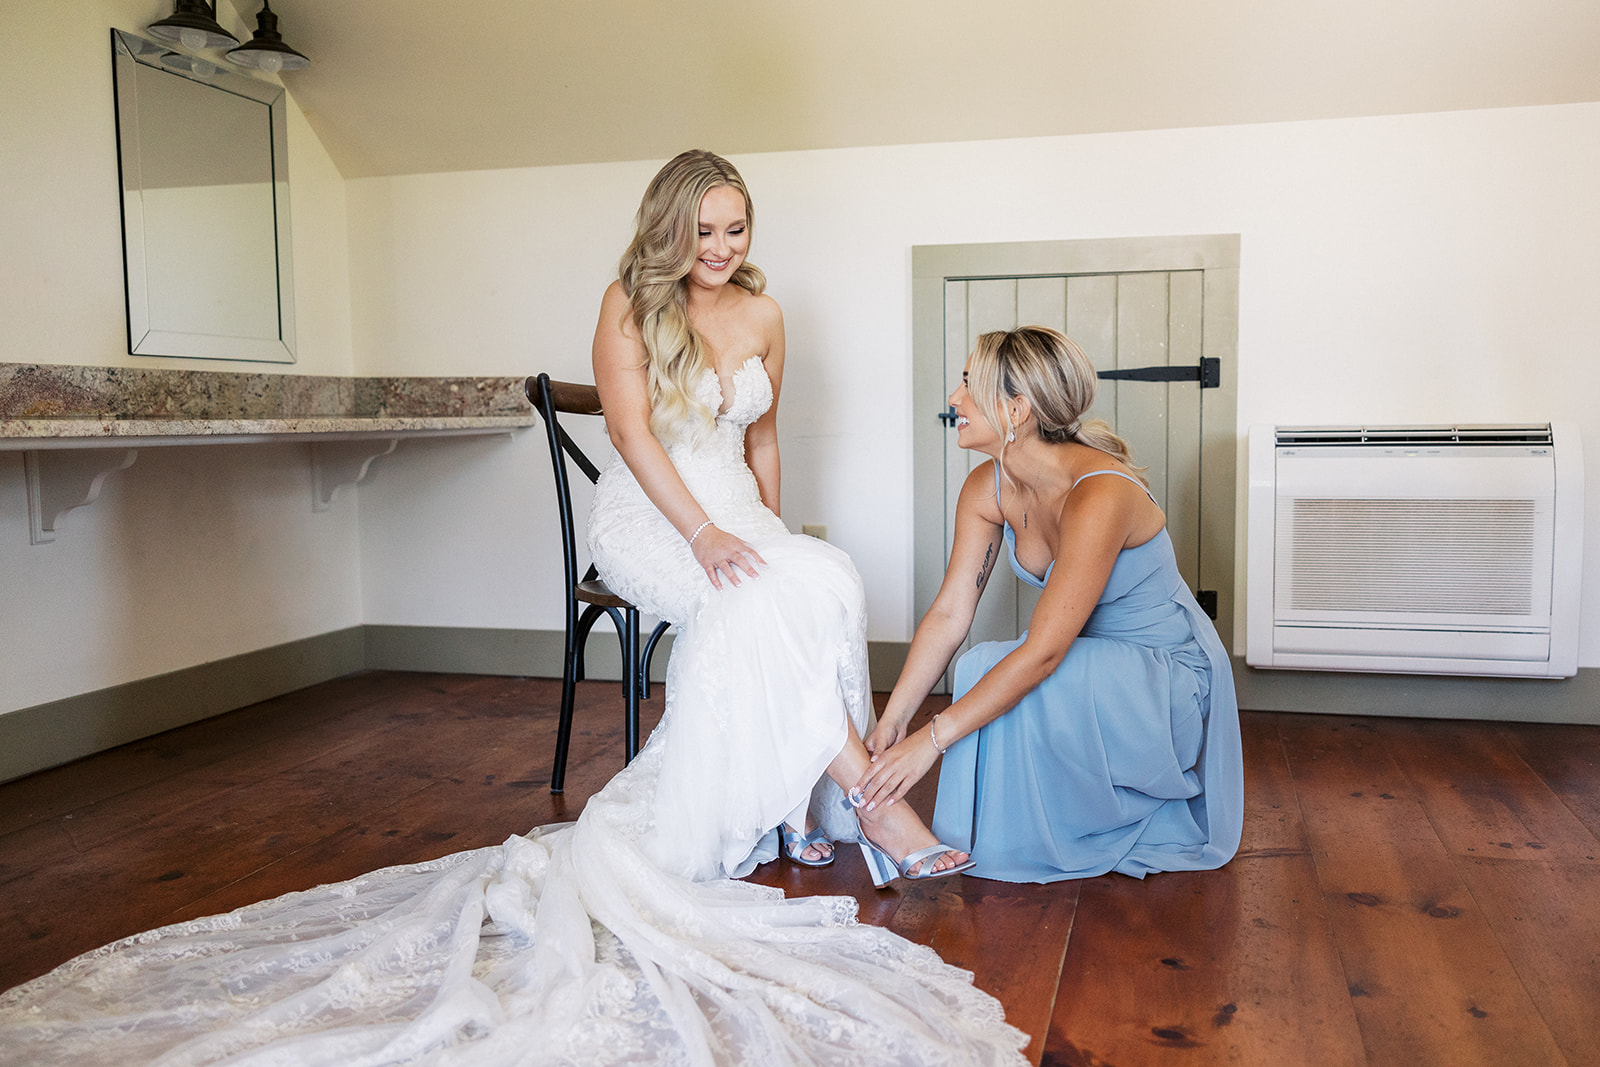 A bridesmaid in a blue dress helps the bride put on her shoes while sitting in a chair